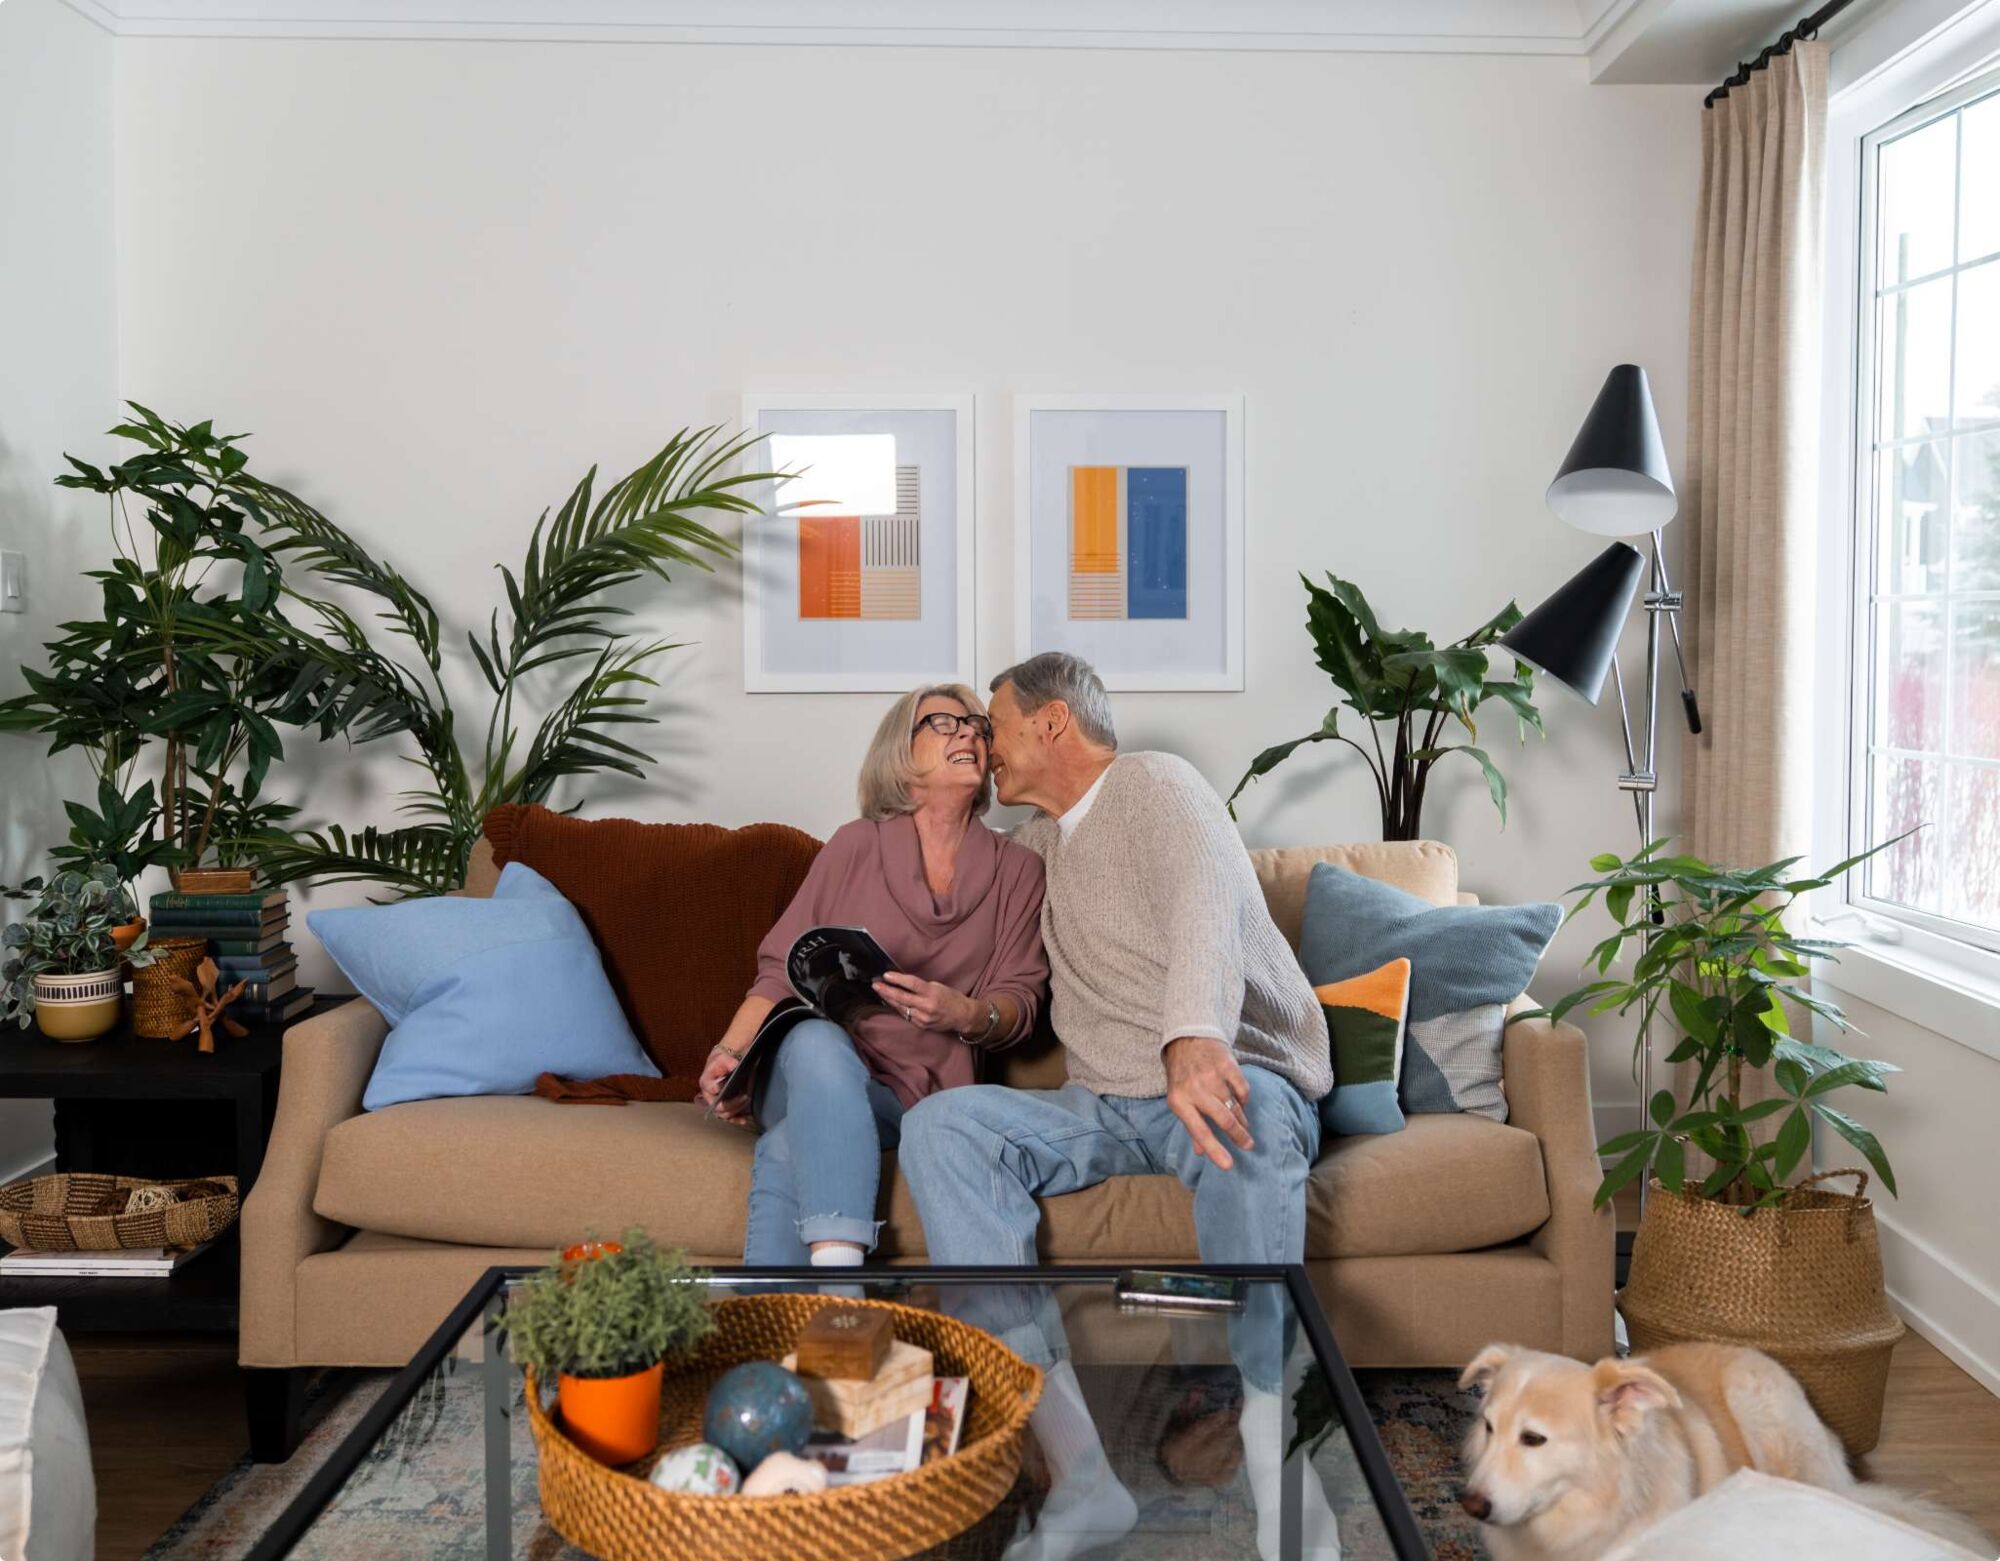 An older couple sitting on a couch lovingly with plans and lighting in the background. 